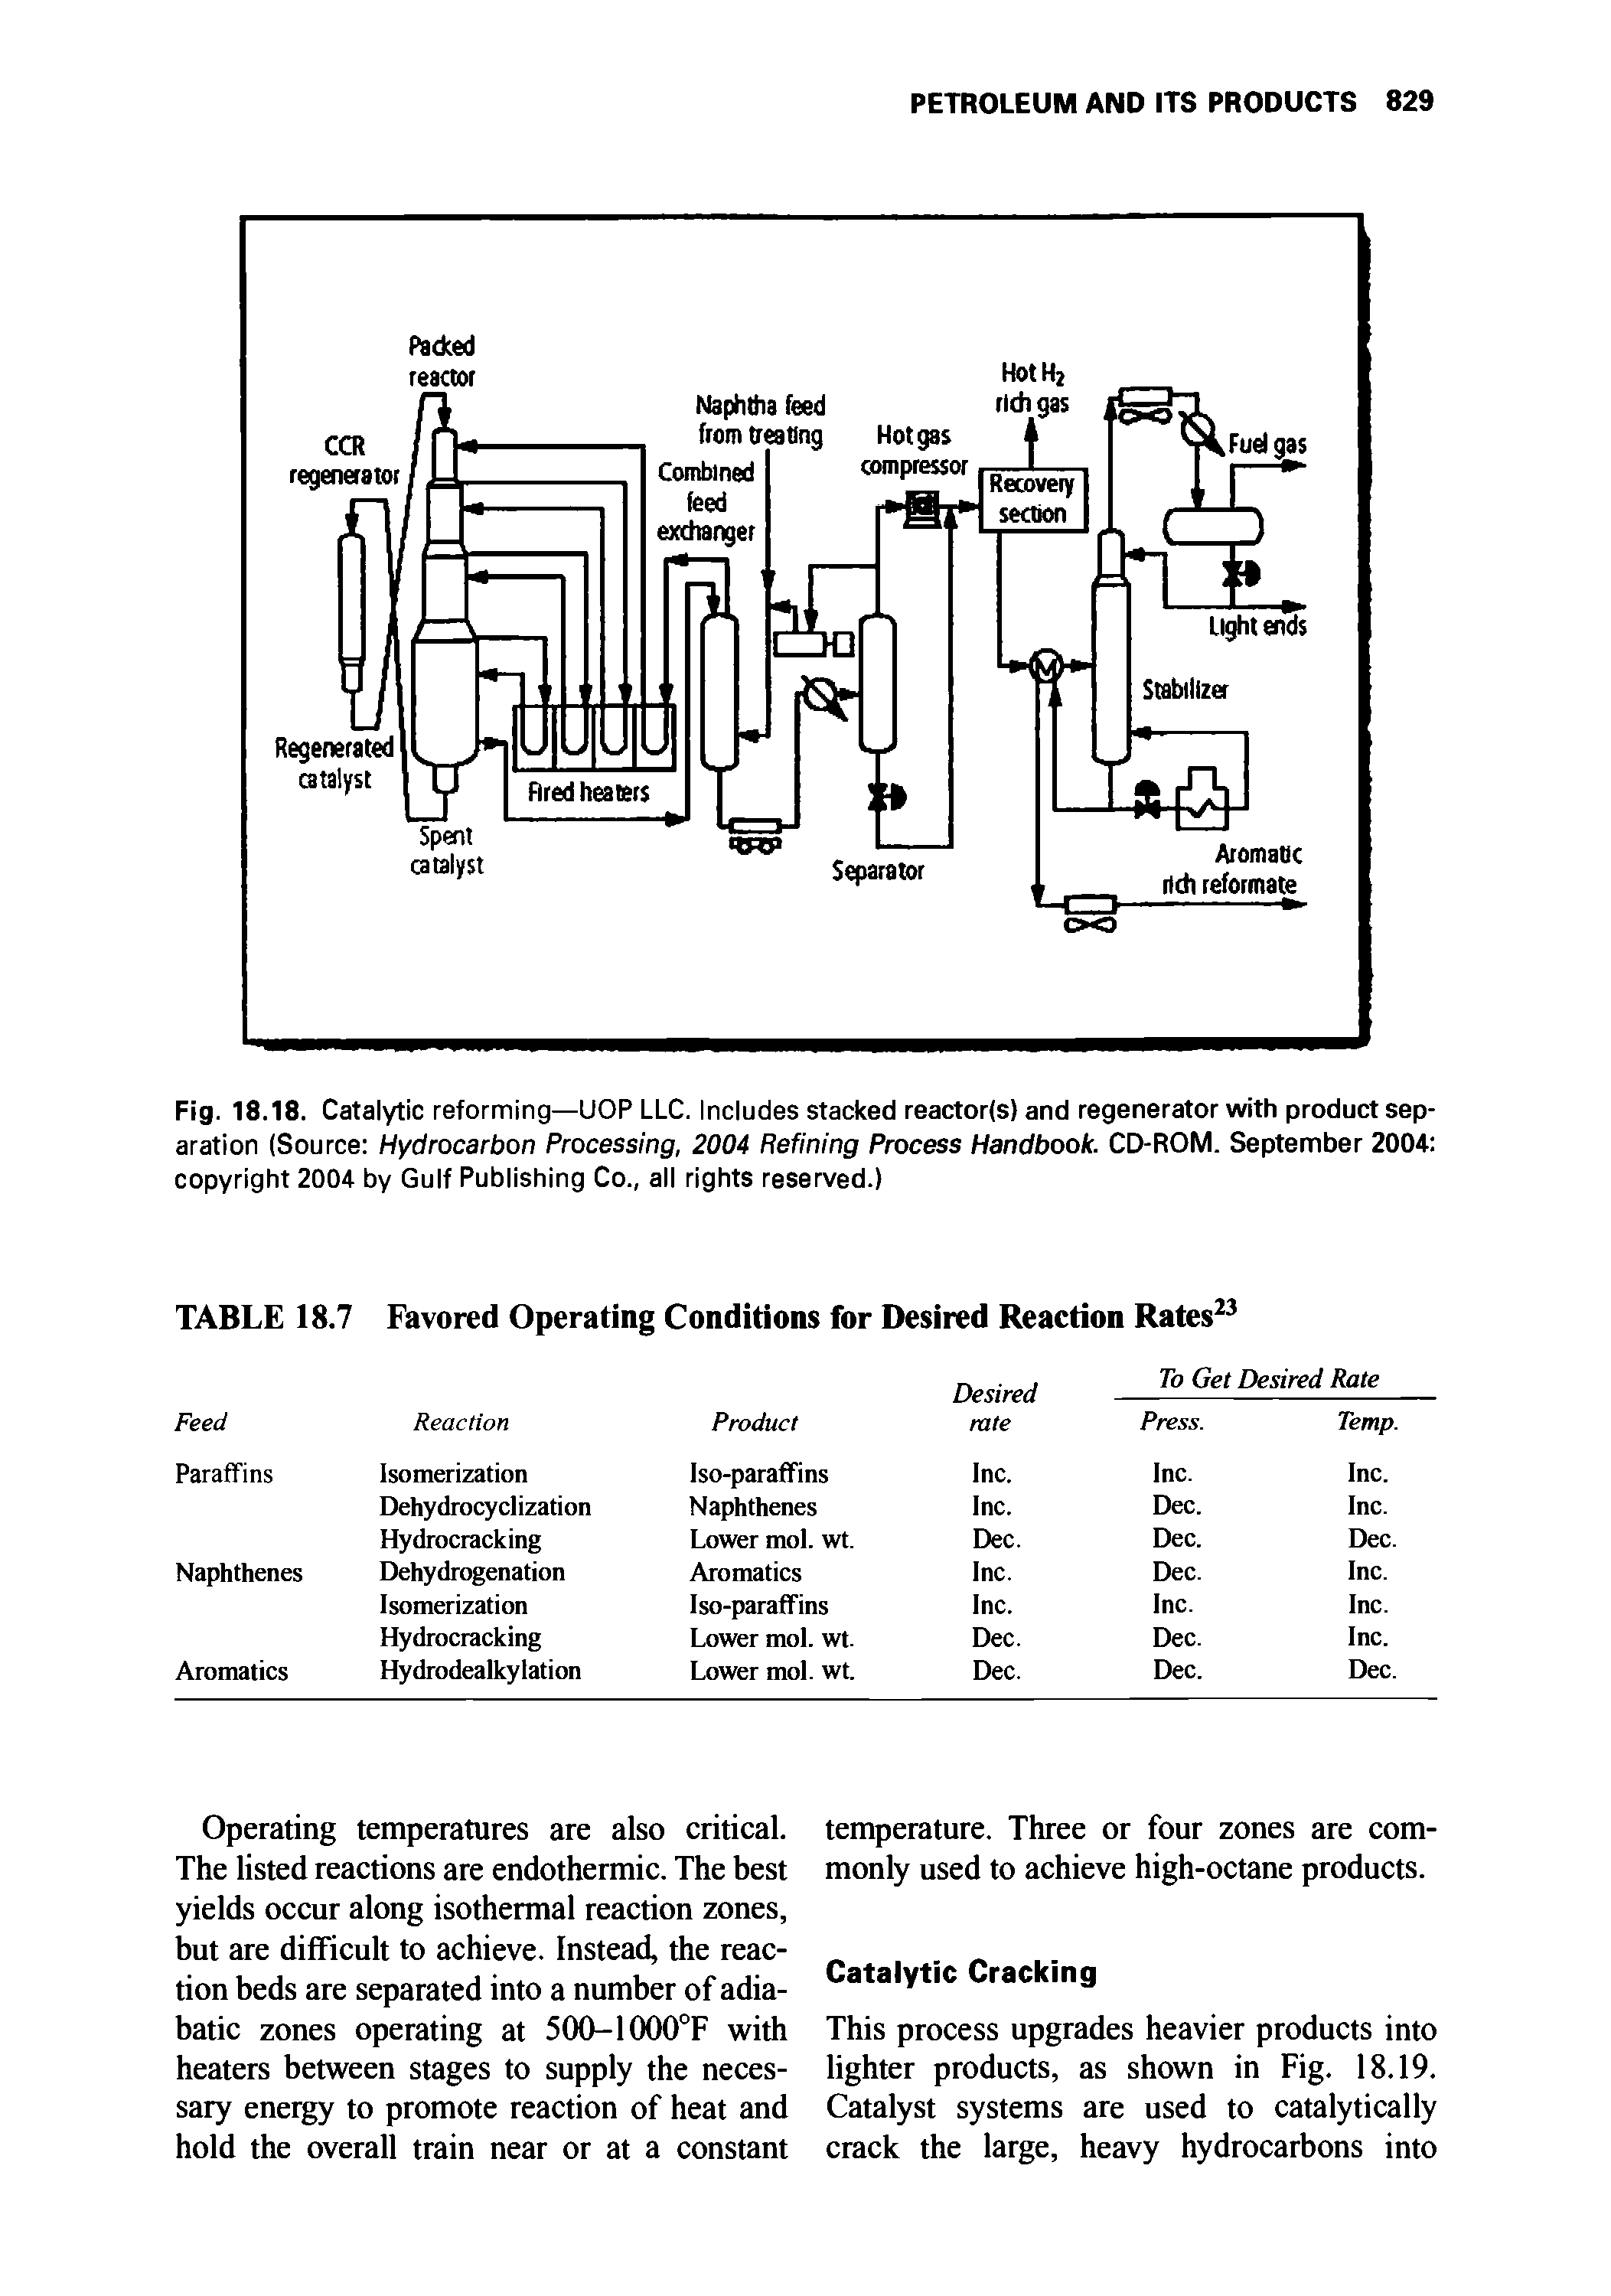 Fig. 18.18. Catalytic reforming—UOP LLC. Includes stacked reactor(s) and regenerator with product separation (Source Hydrocarbon Processing, 2004 Refining Process Handbook. CD-ROM. September 2004 copyright 2004 by Gulf Publishing Co., all rights reserved.)...